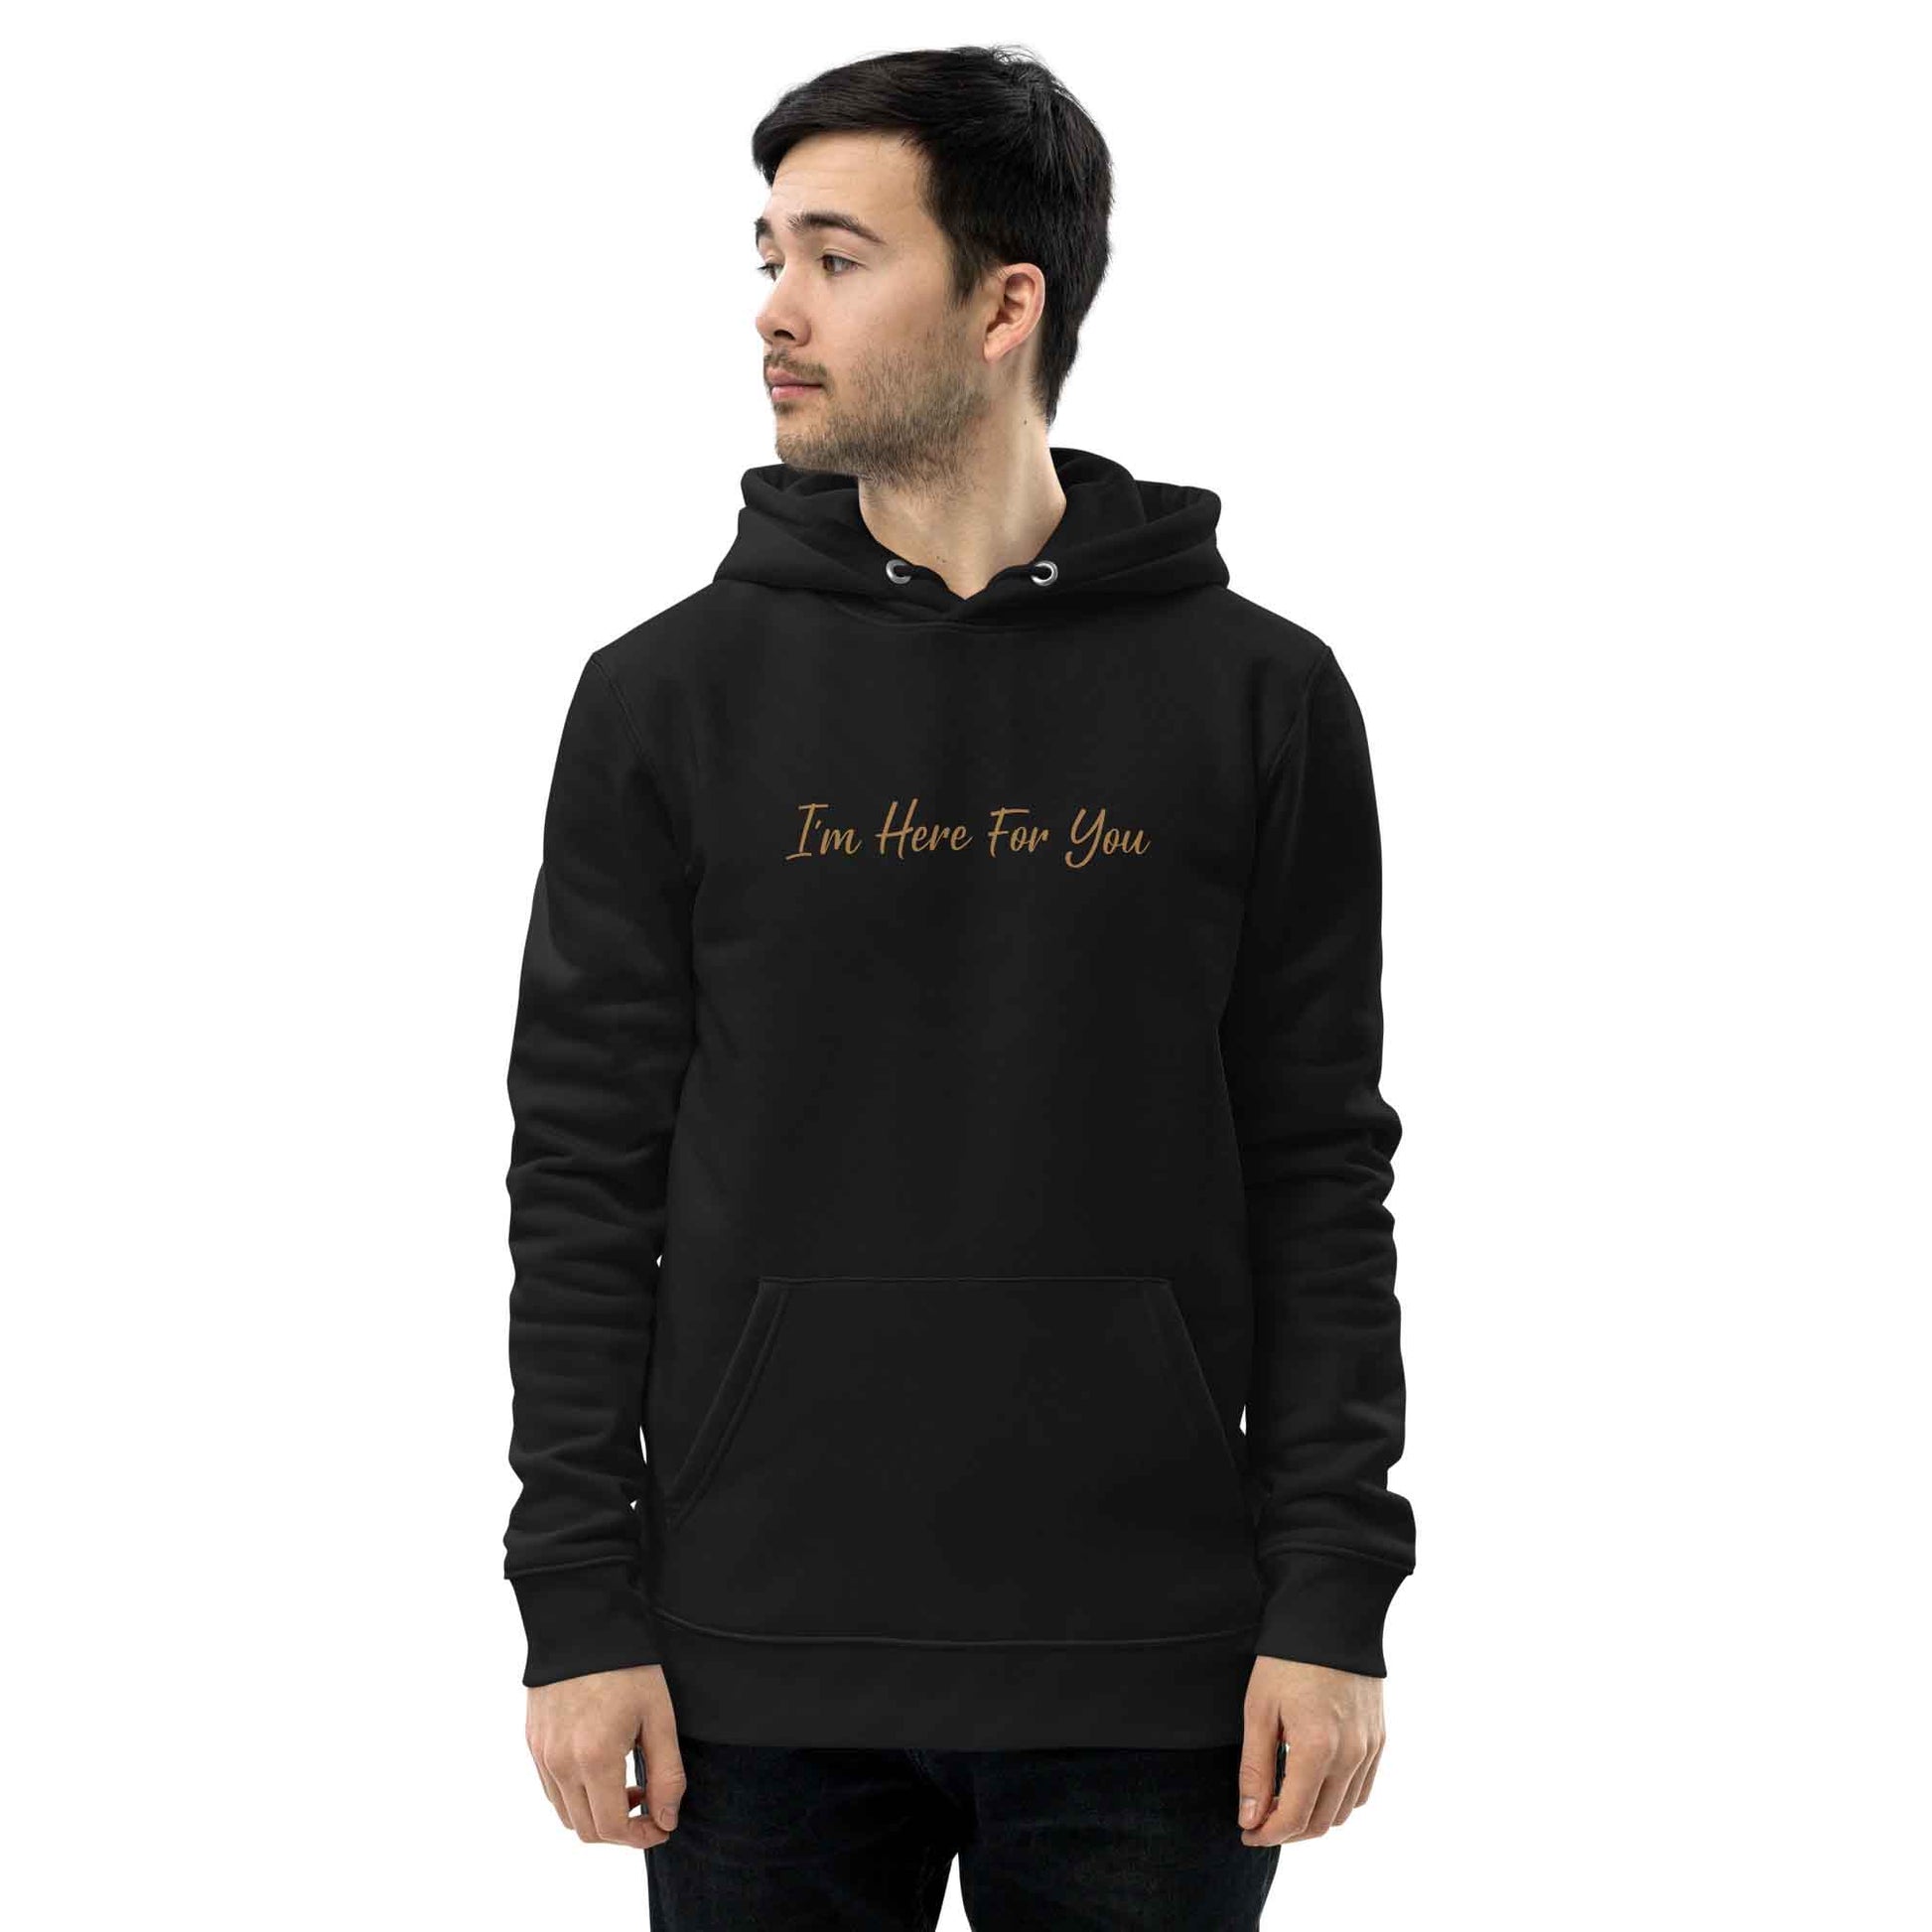 Men black inspirational hoodie with inspirational quote, "I'm Here For You."